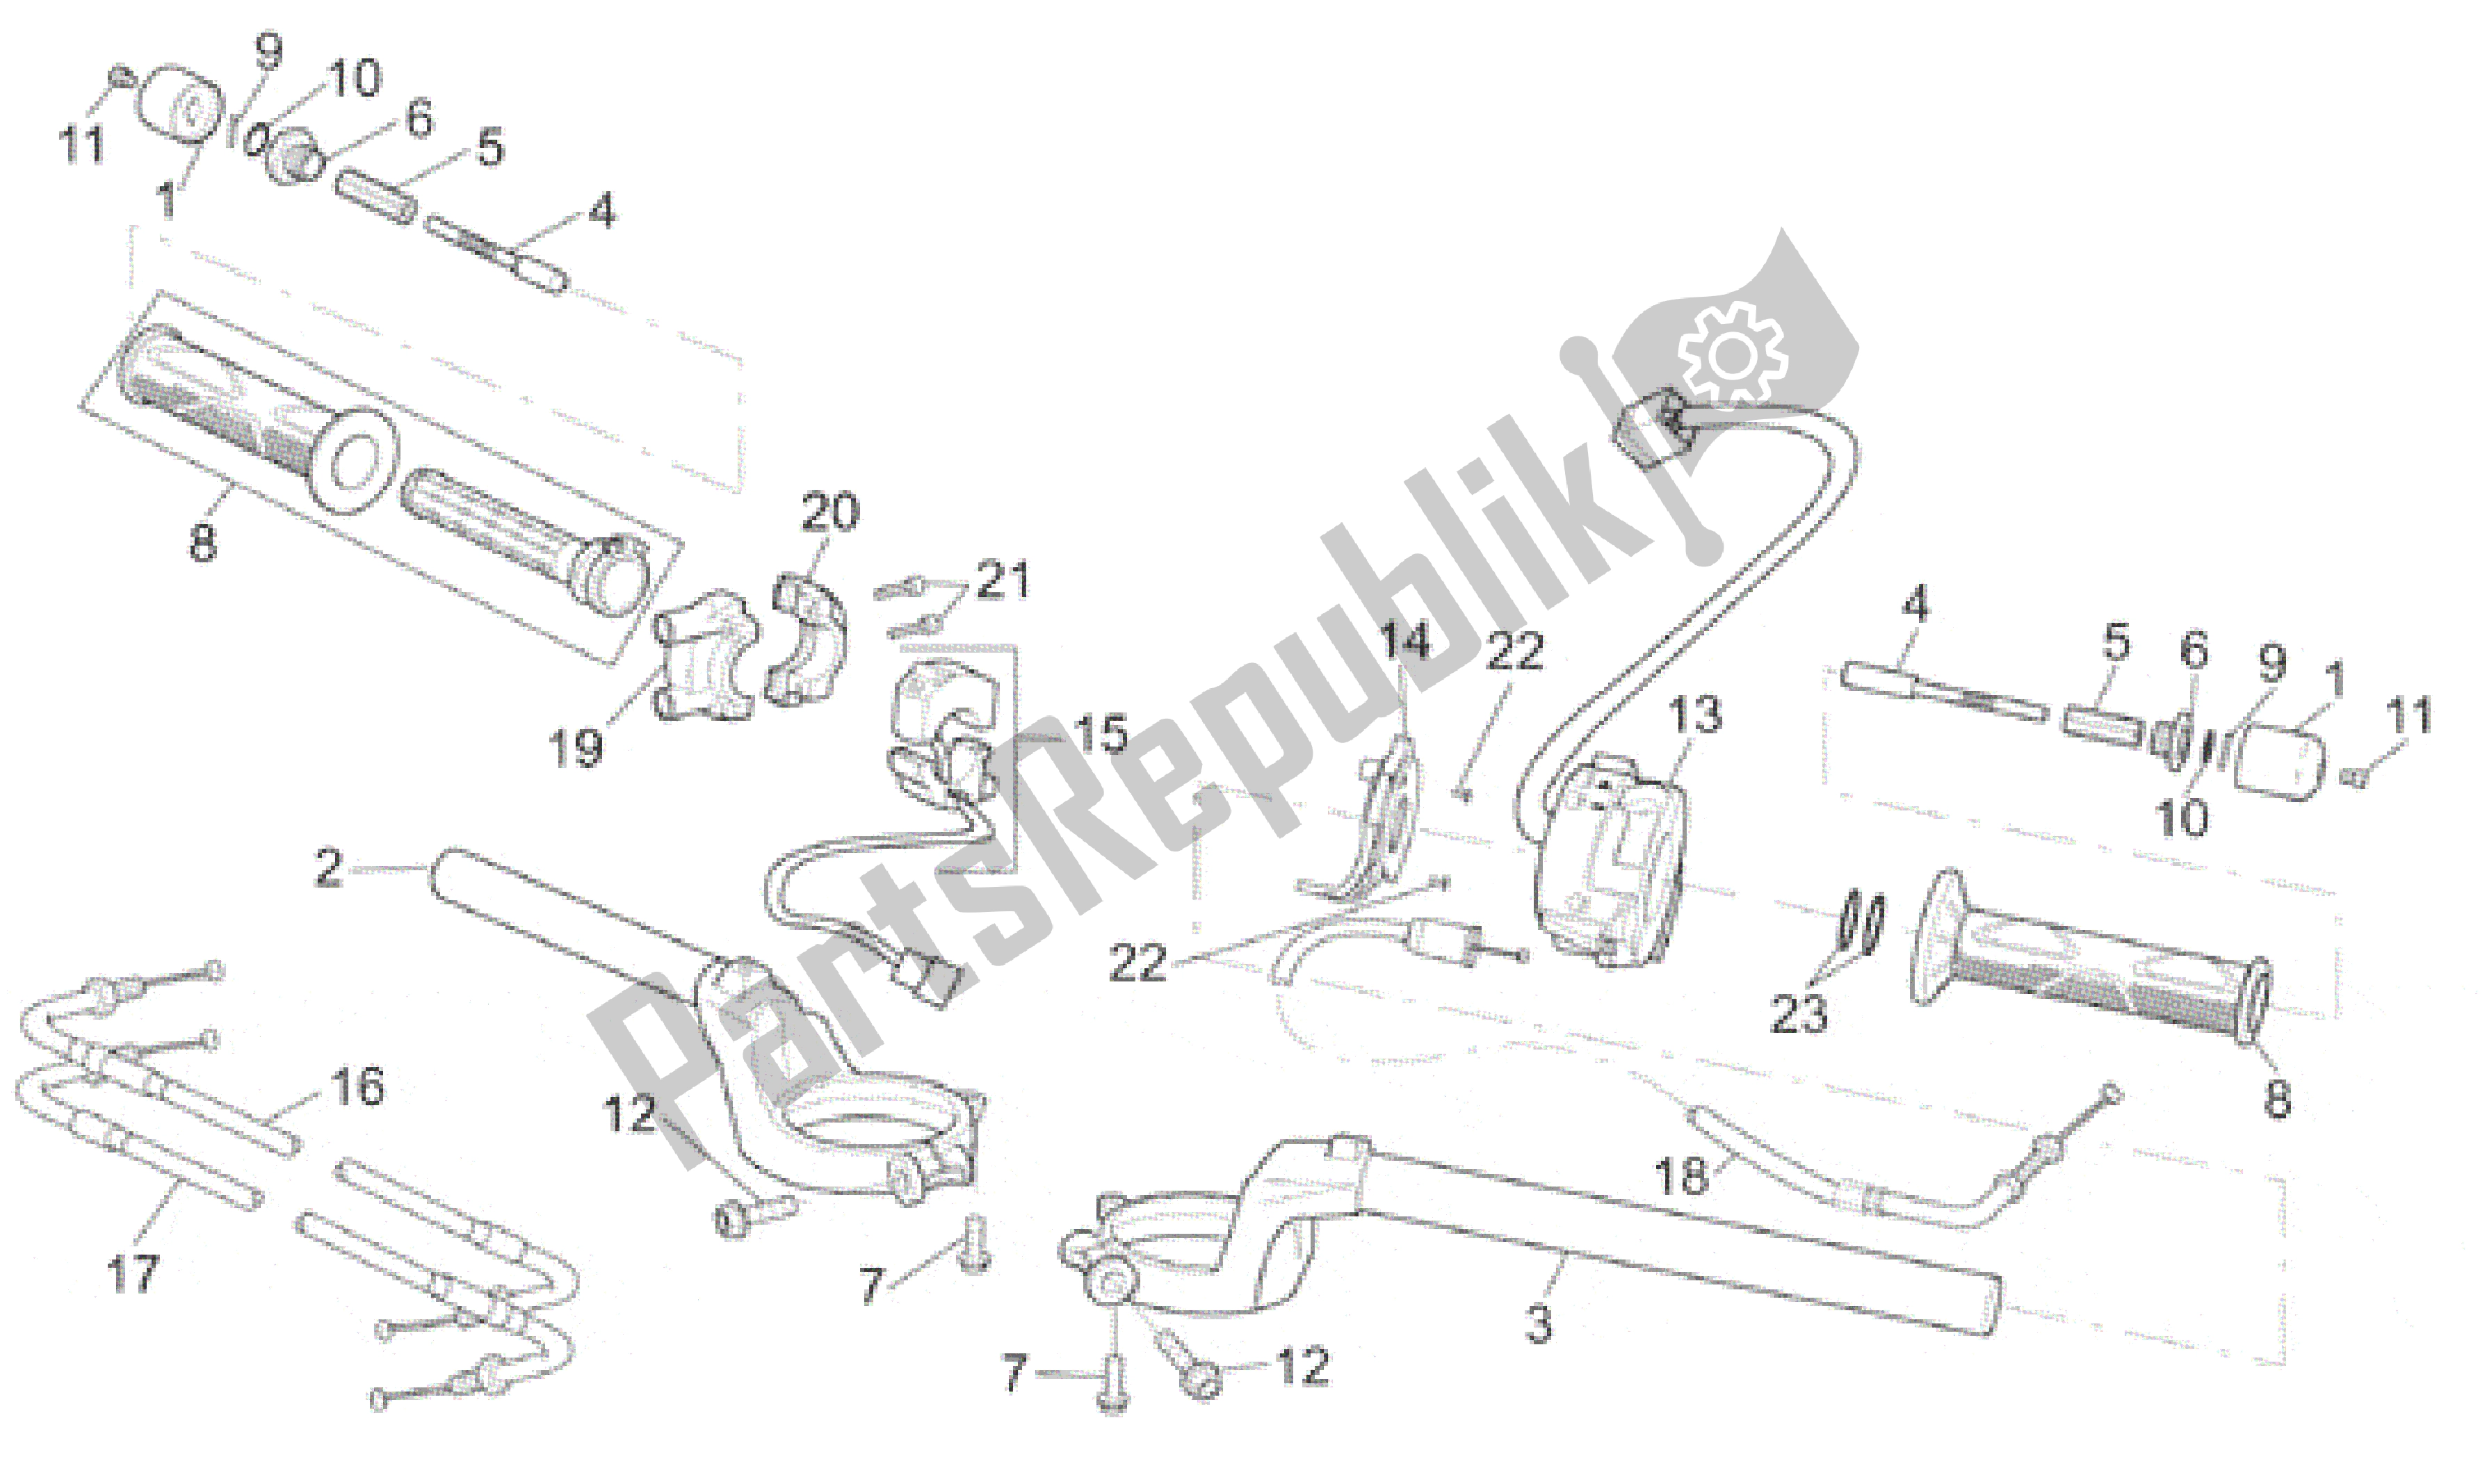 All parts for the Handlebar of the Aprilia RSV Mille R 3901 1000 2001 - 2002